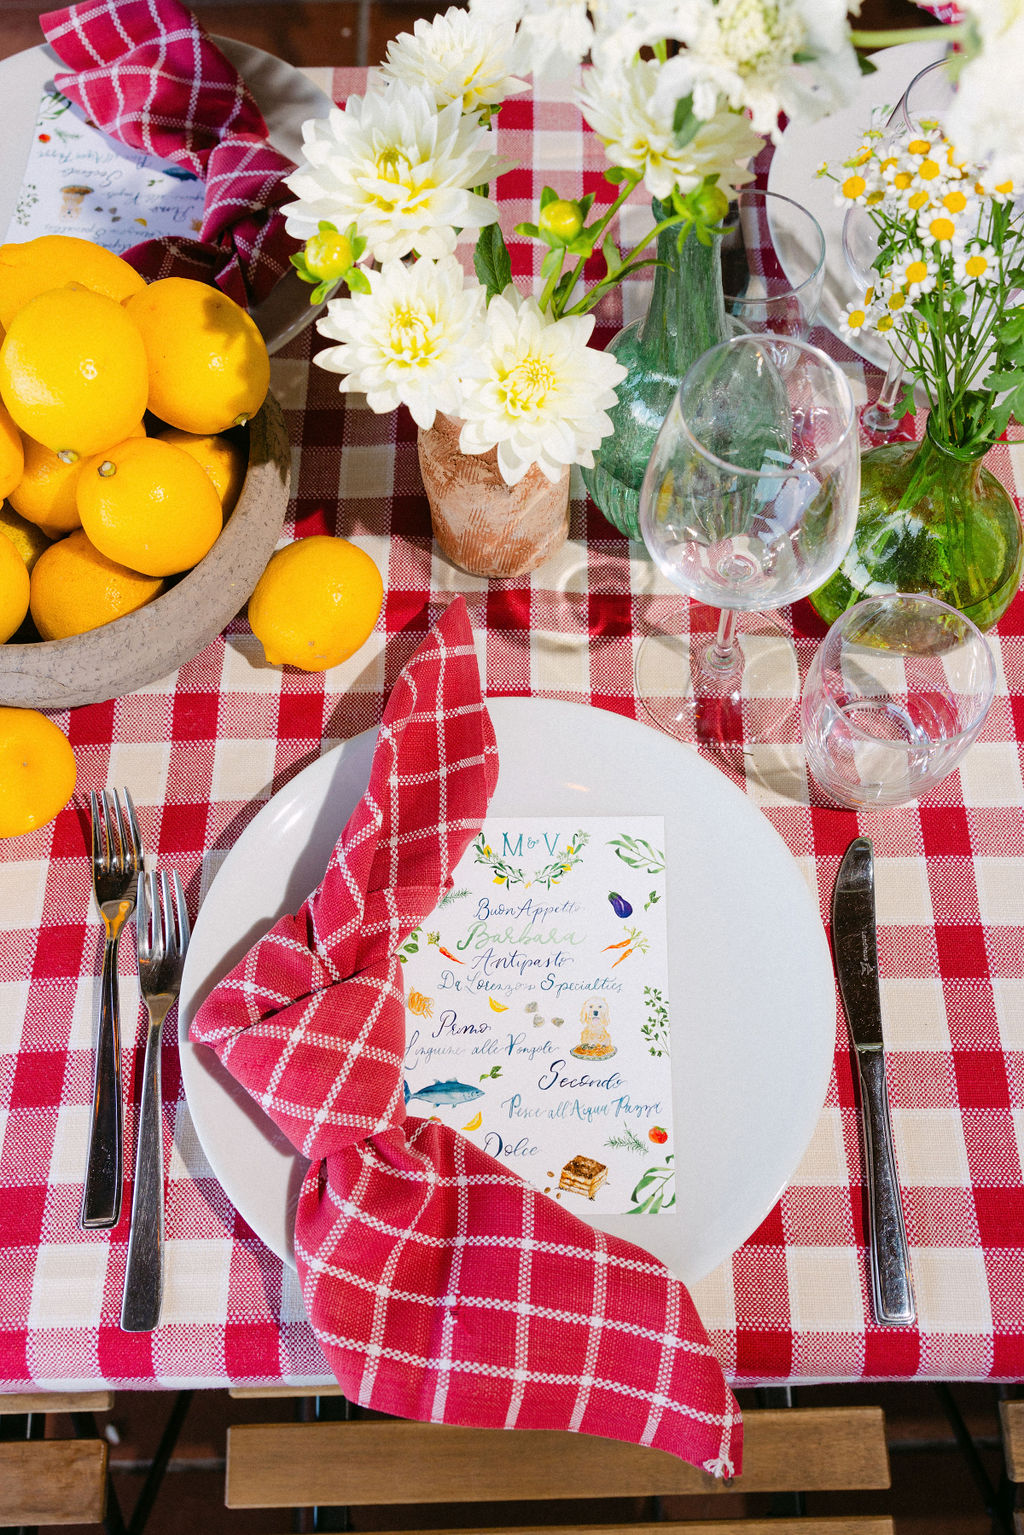 gingham pattern napkins and tablecloth with menu